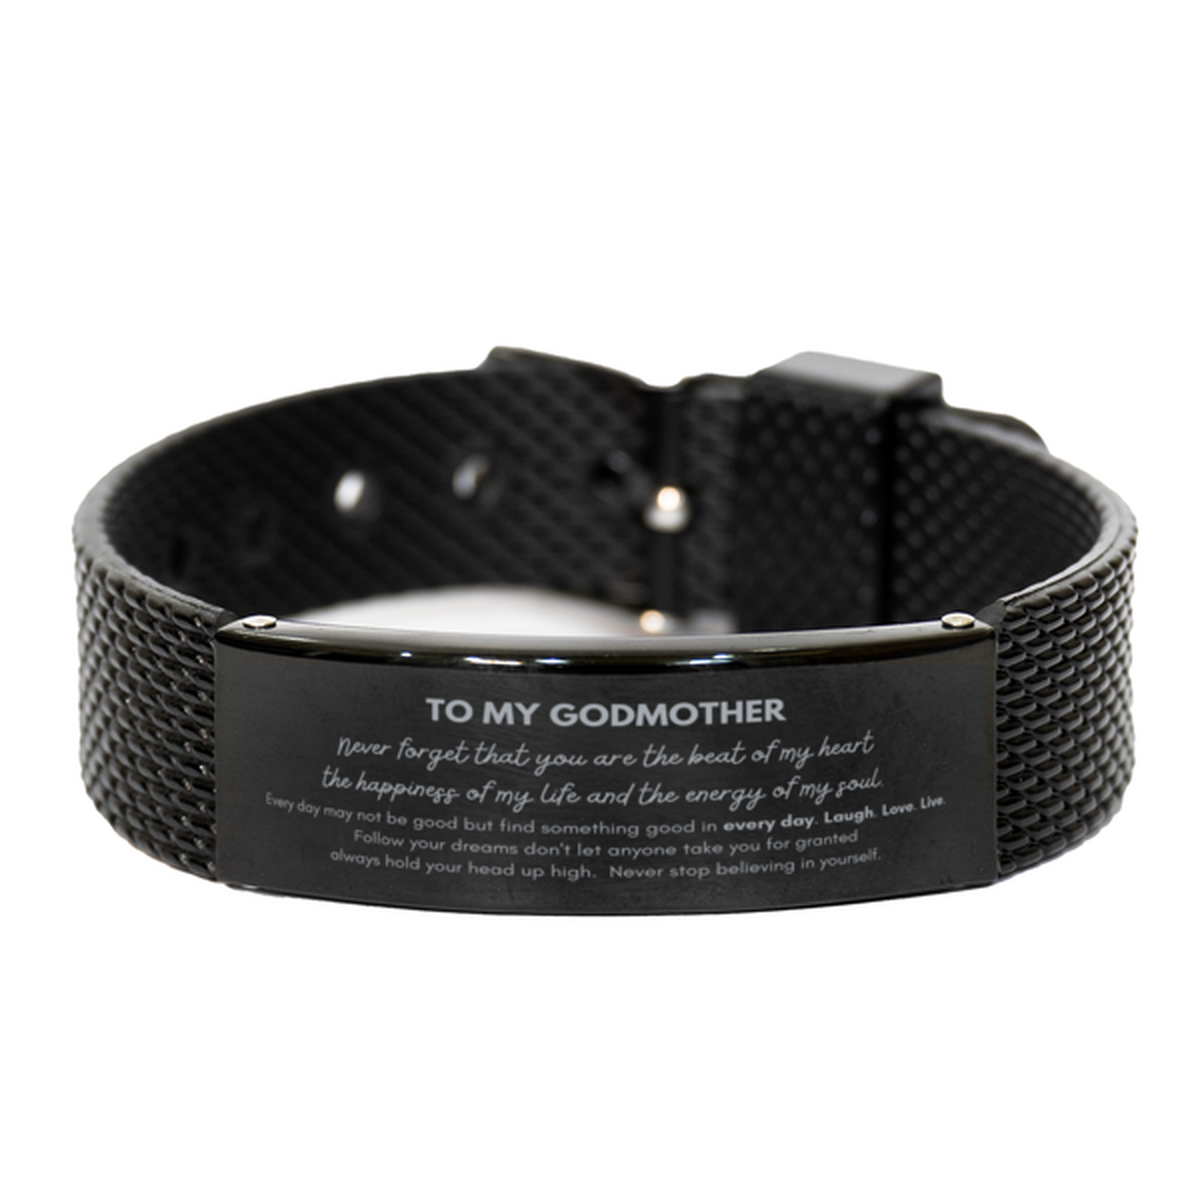 To My Godmother Bracelet Gifts, Christmas Godmother Black Shark Mesh Bracelet Present, Birthday Unique Motivational For Godmother, To My Godmother Never forget that you are the beat of my heart the happiness of my life and the energy of my soul